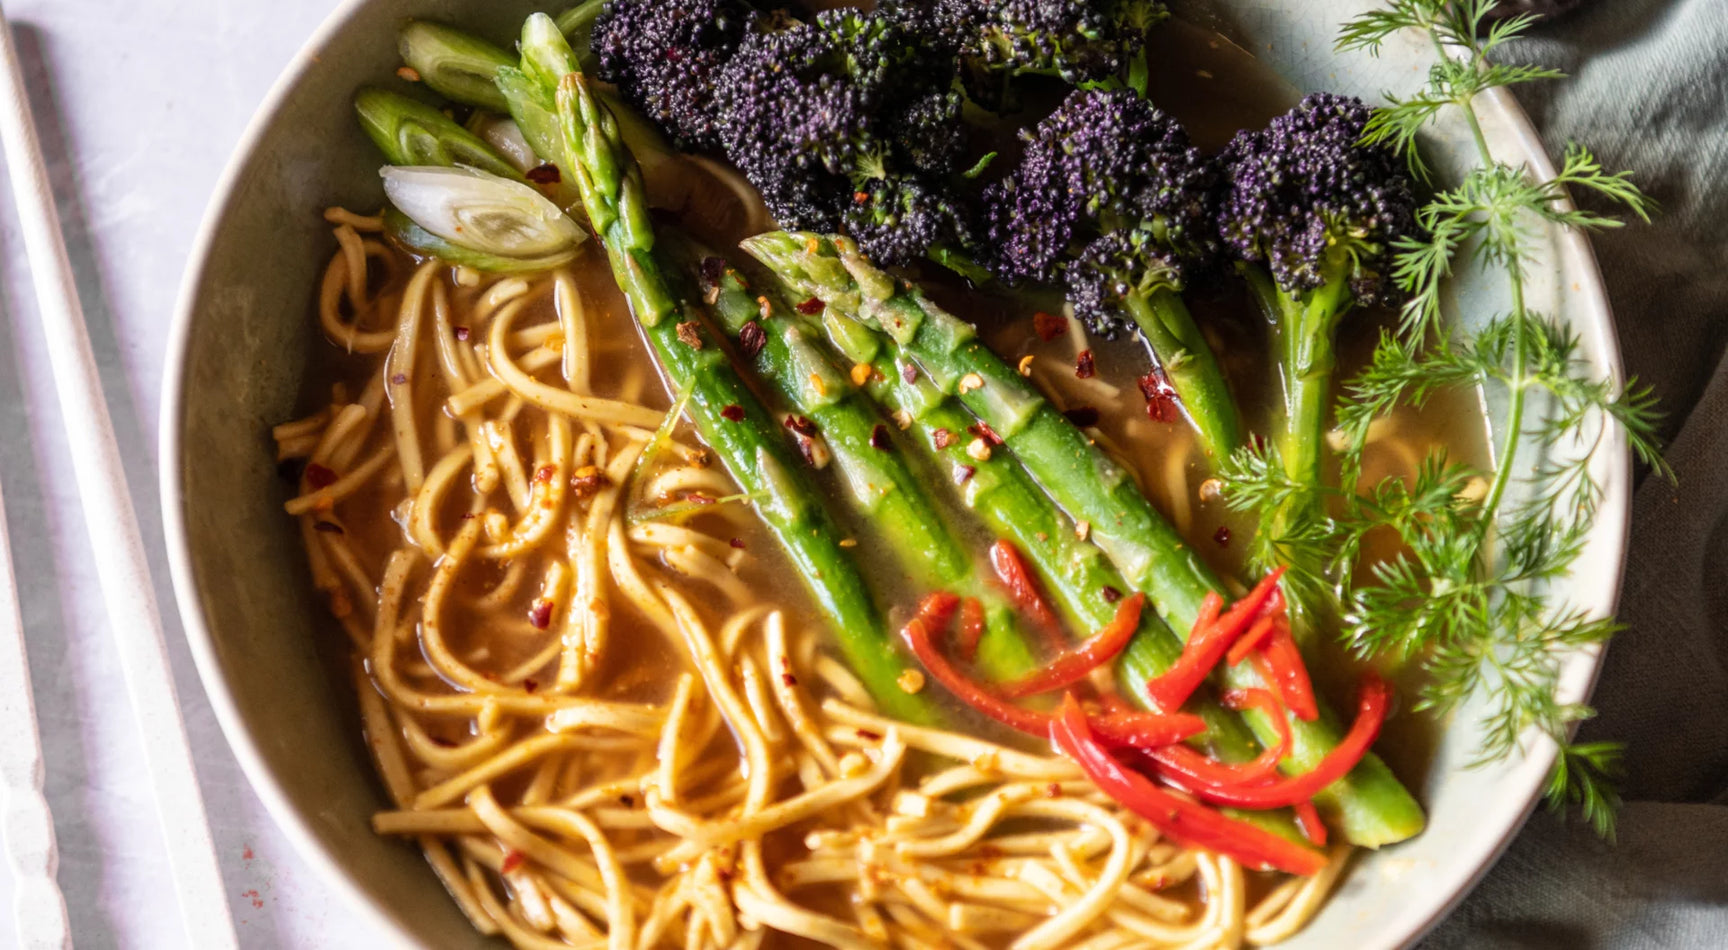 Recipe: Mellow Miso with Purple Sprouting Broccoli, Asparagus and an indulgent side of Gyoza and Spice Plum Sauce